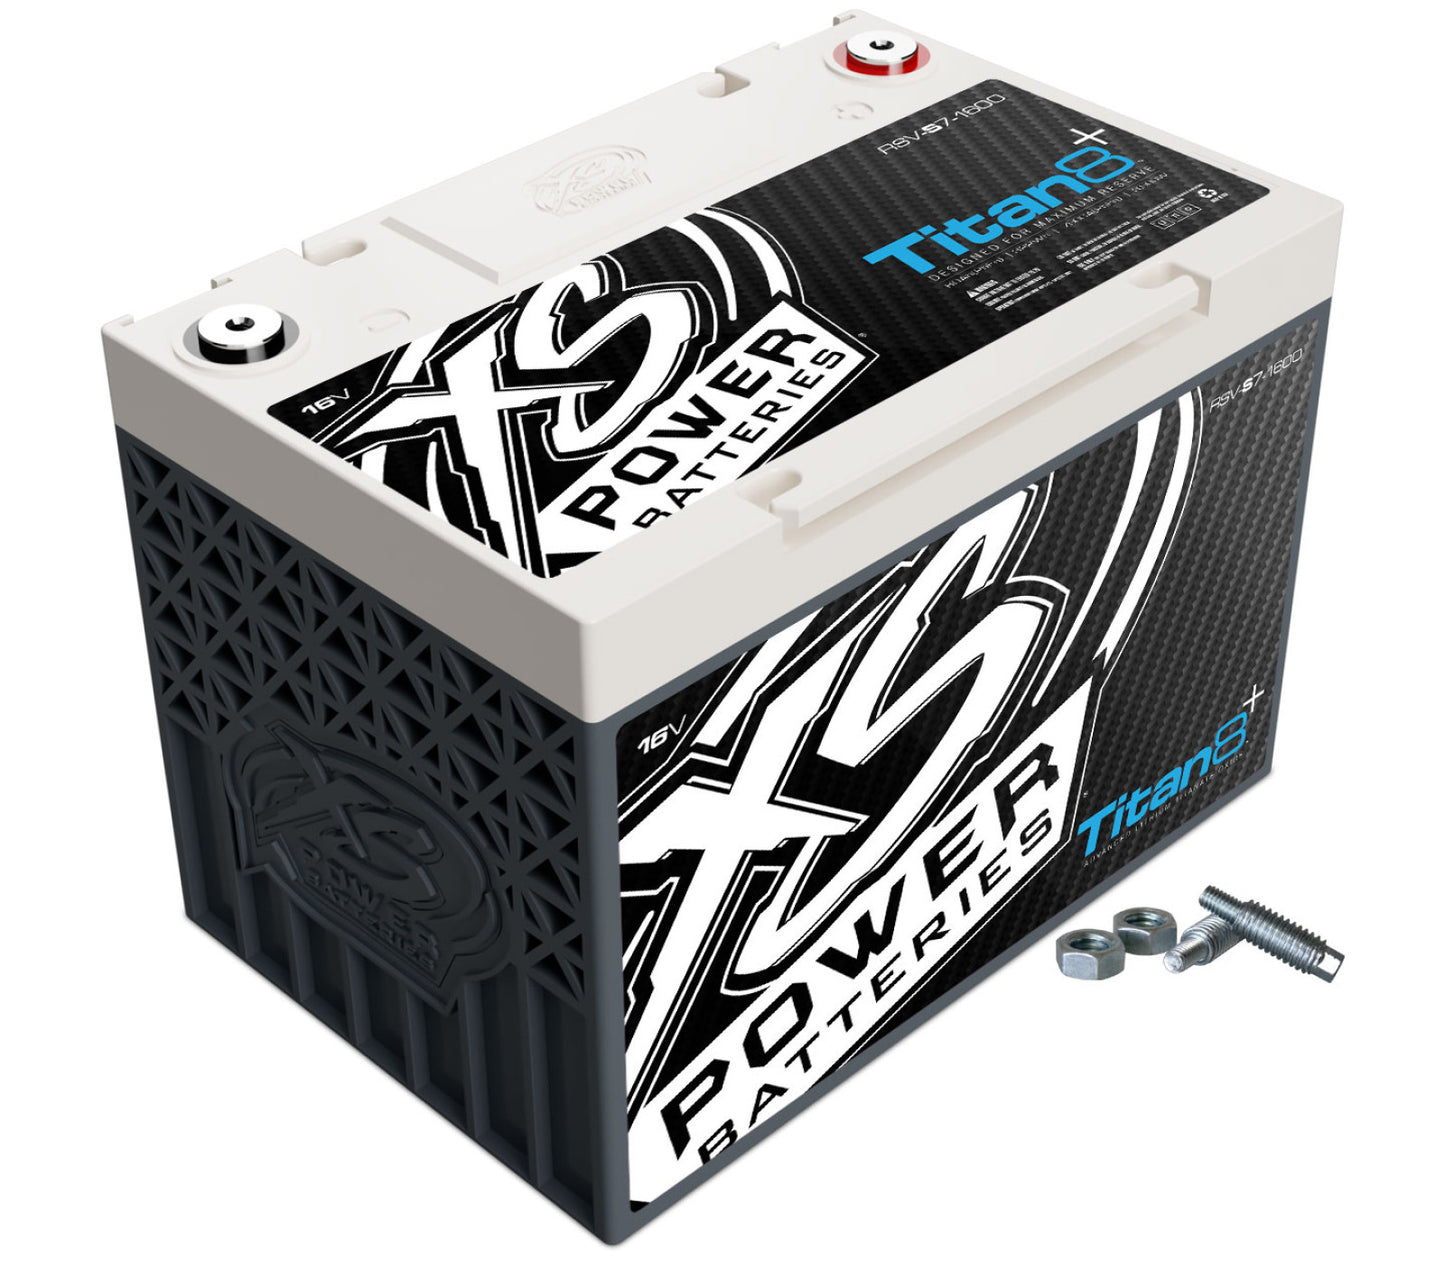 XS Power Batteries 16V Lithium Titan 8 Batteries - 3/8" Stud Terminals Included 1000 Max Amps RSV-S7-1600